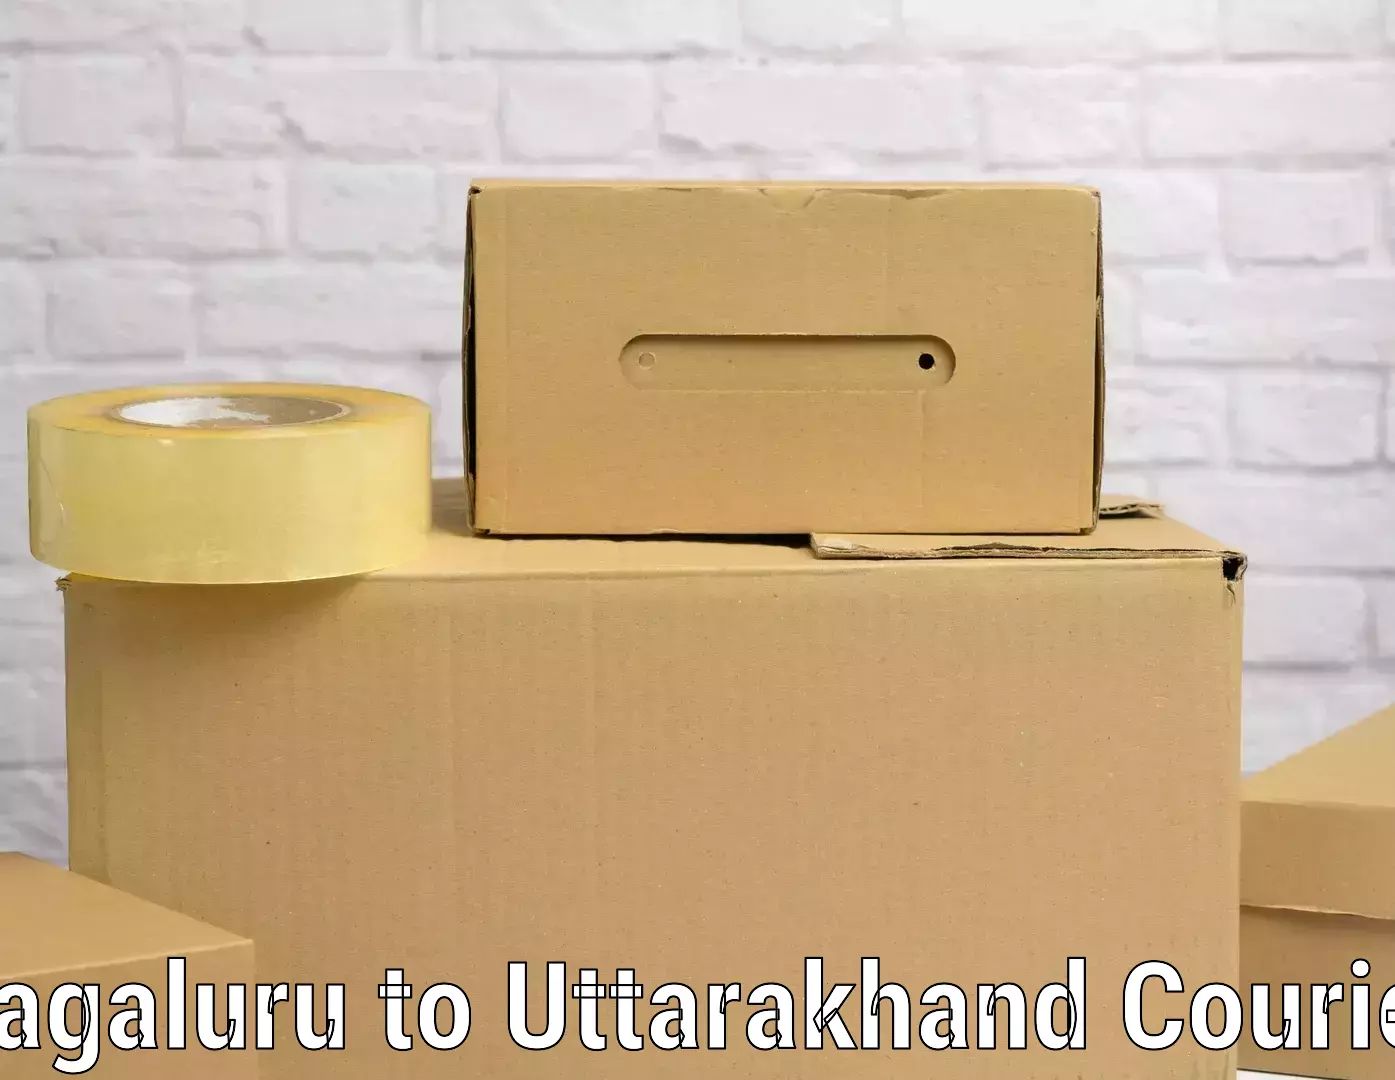 Express luggage delivery in Bagaluru to Uttarakhand